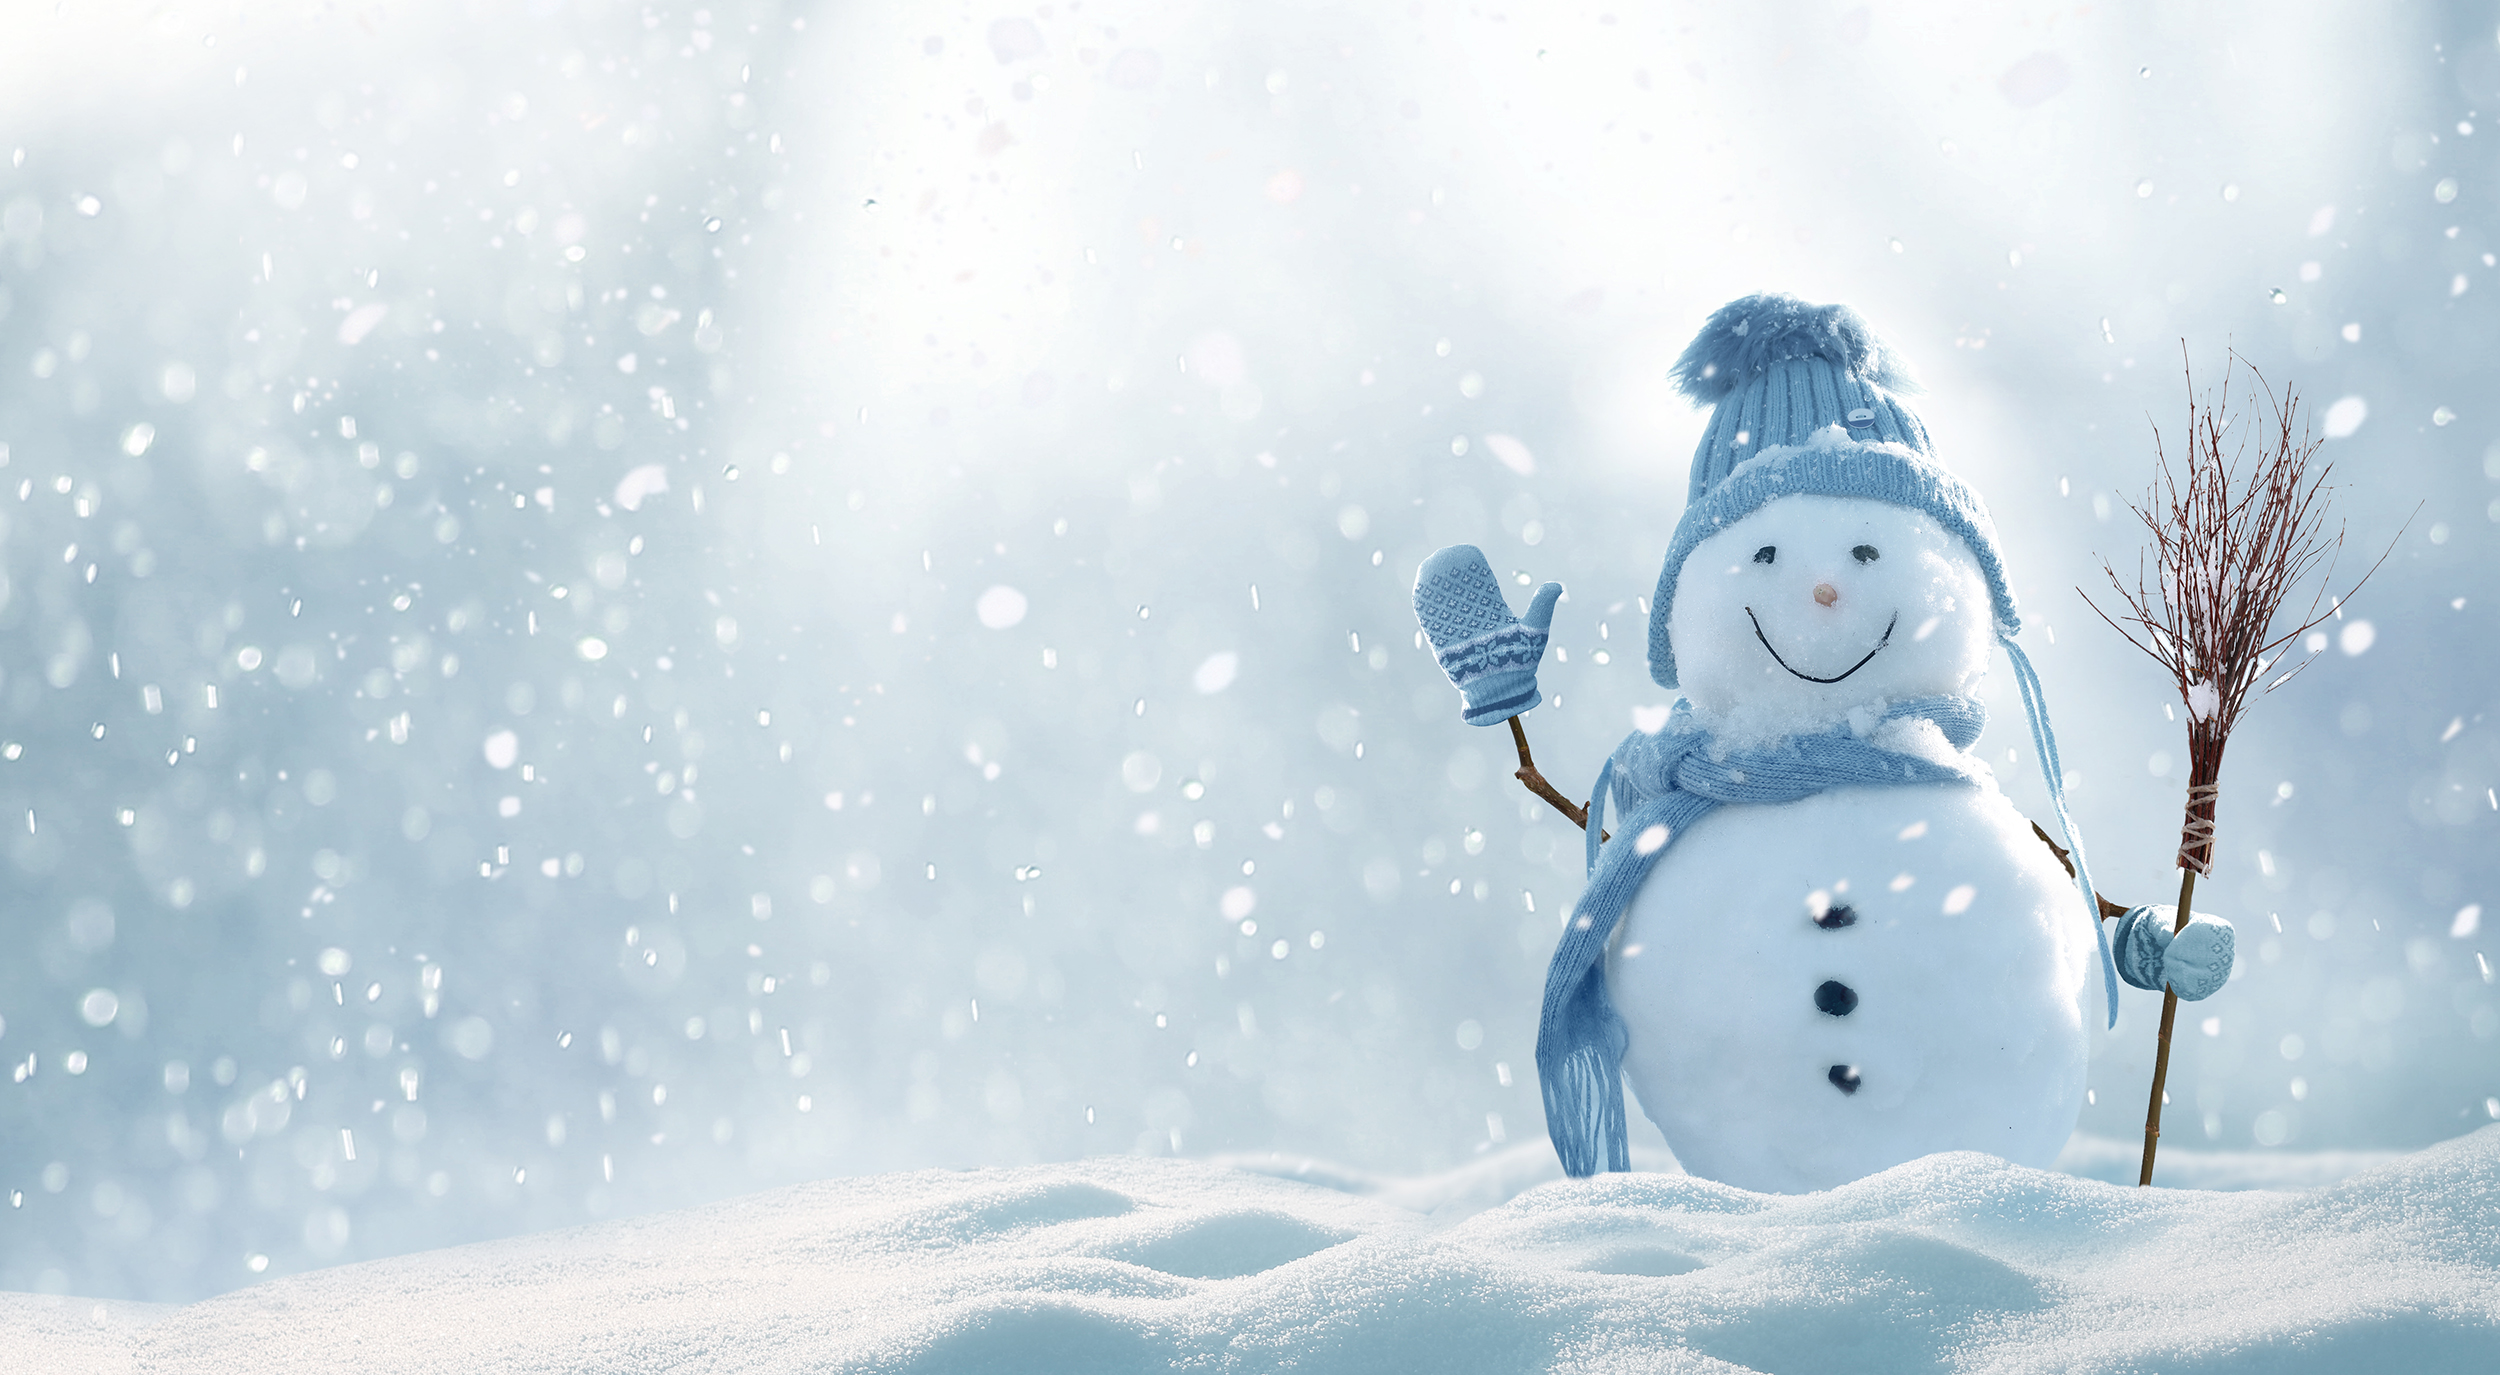 Do you wanna build a snowman? - A Mother's Heritage